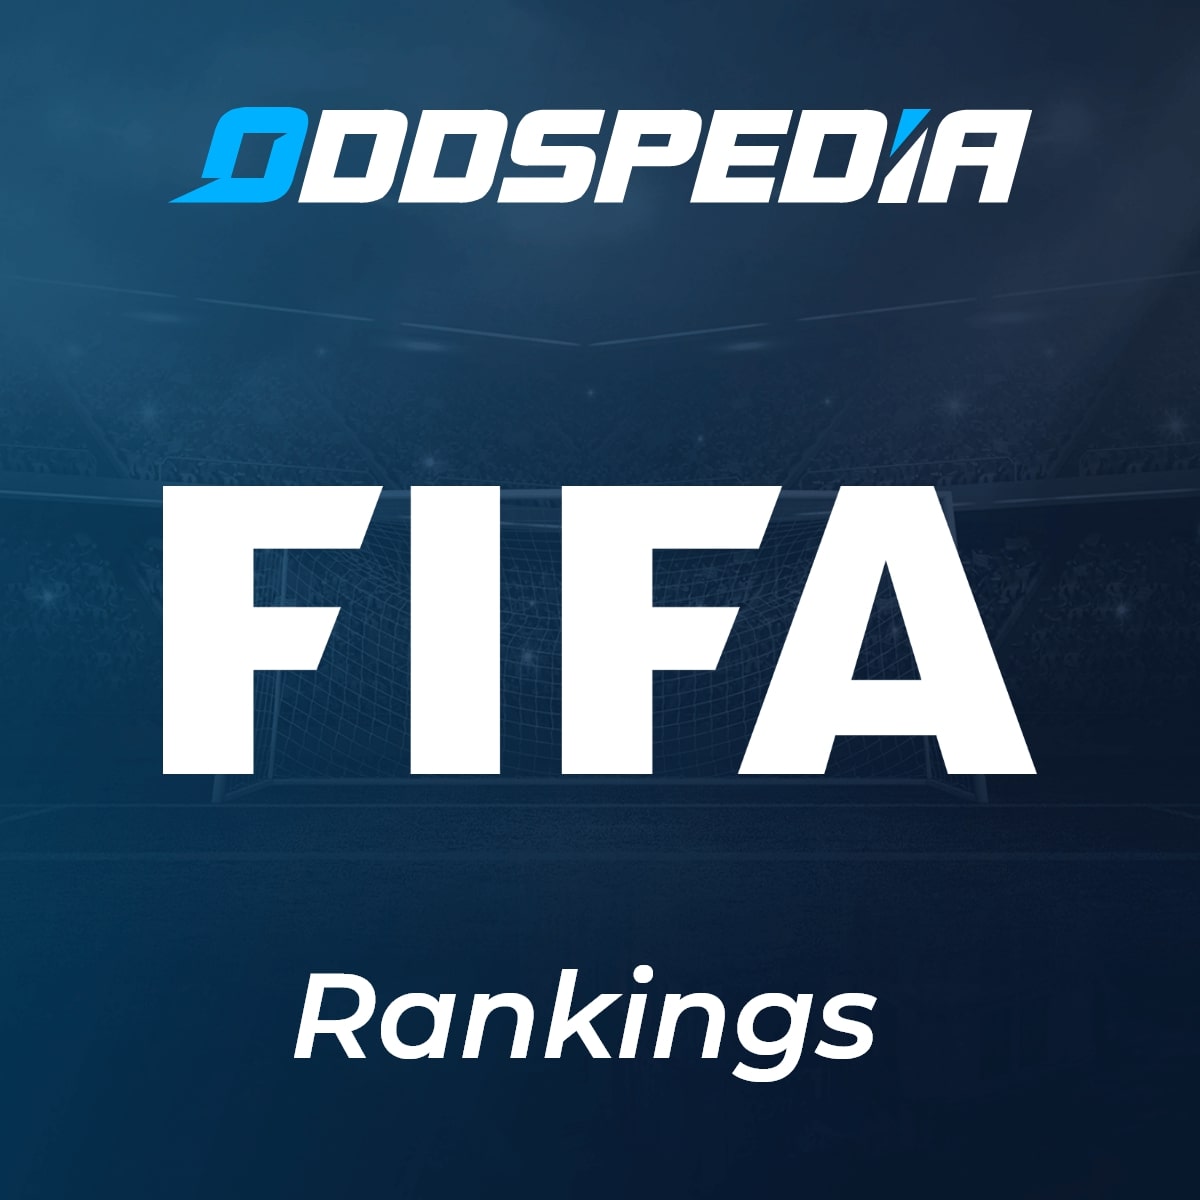 Every major nation's highest and lowest FIFA ranking since records